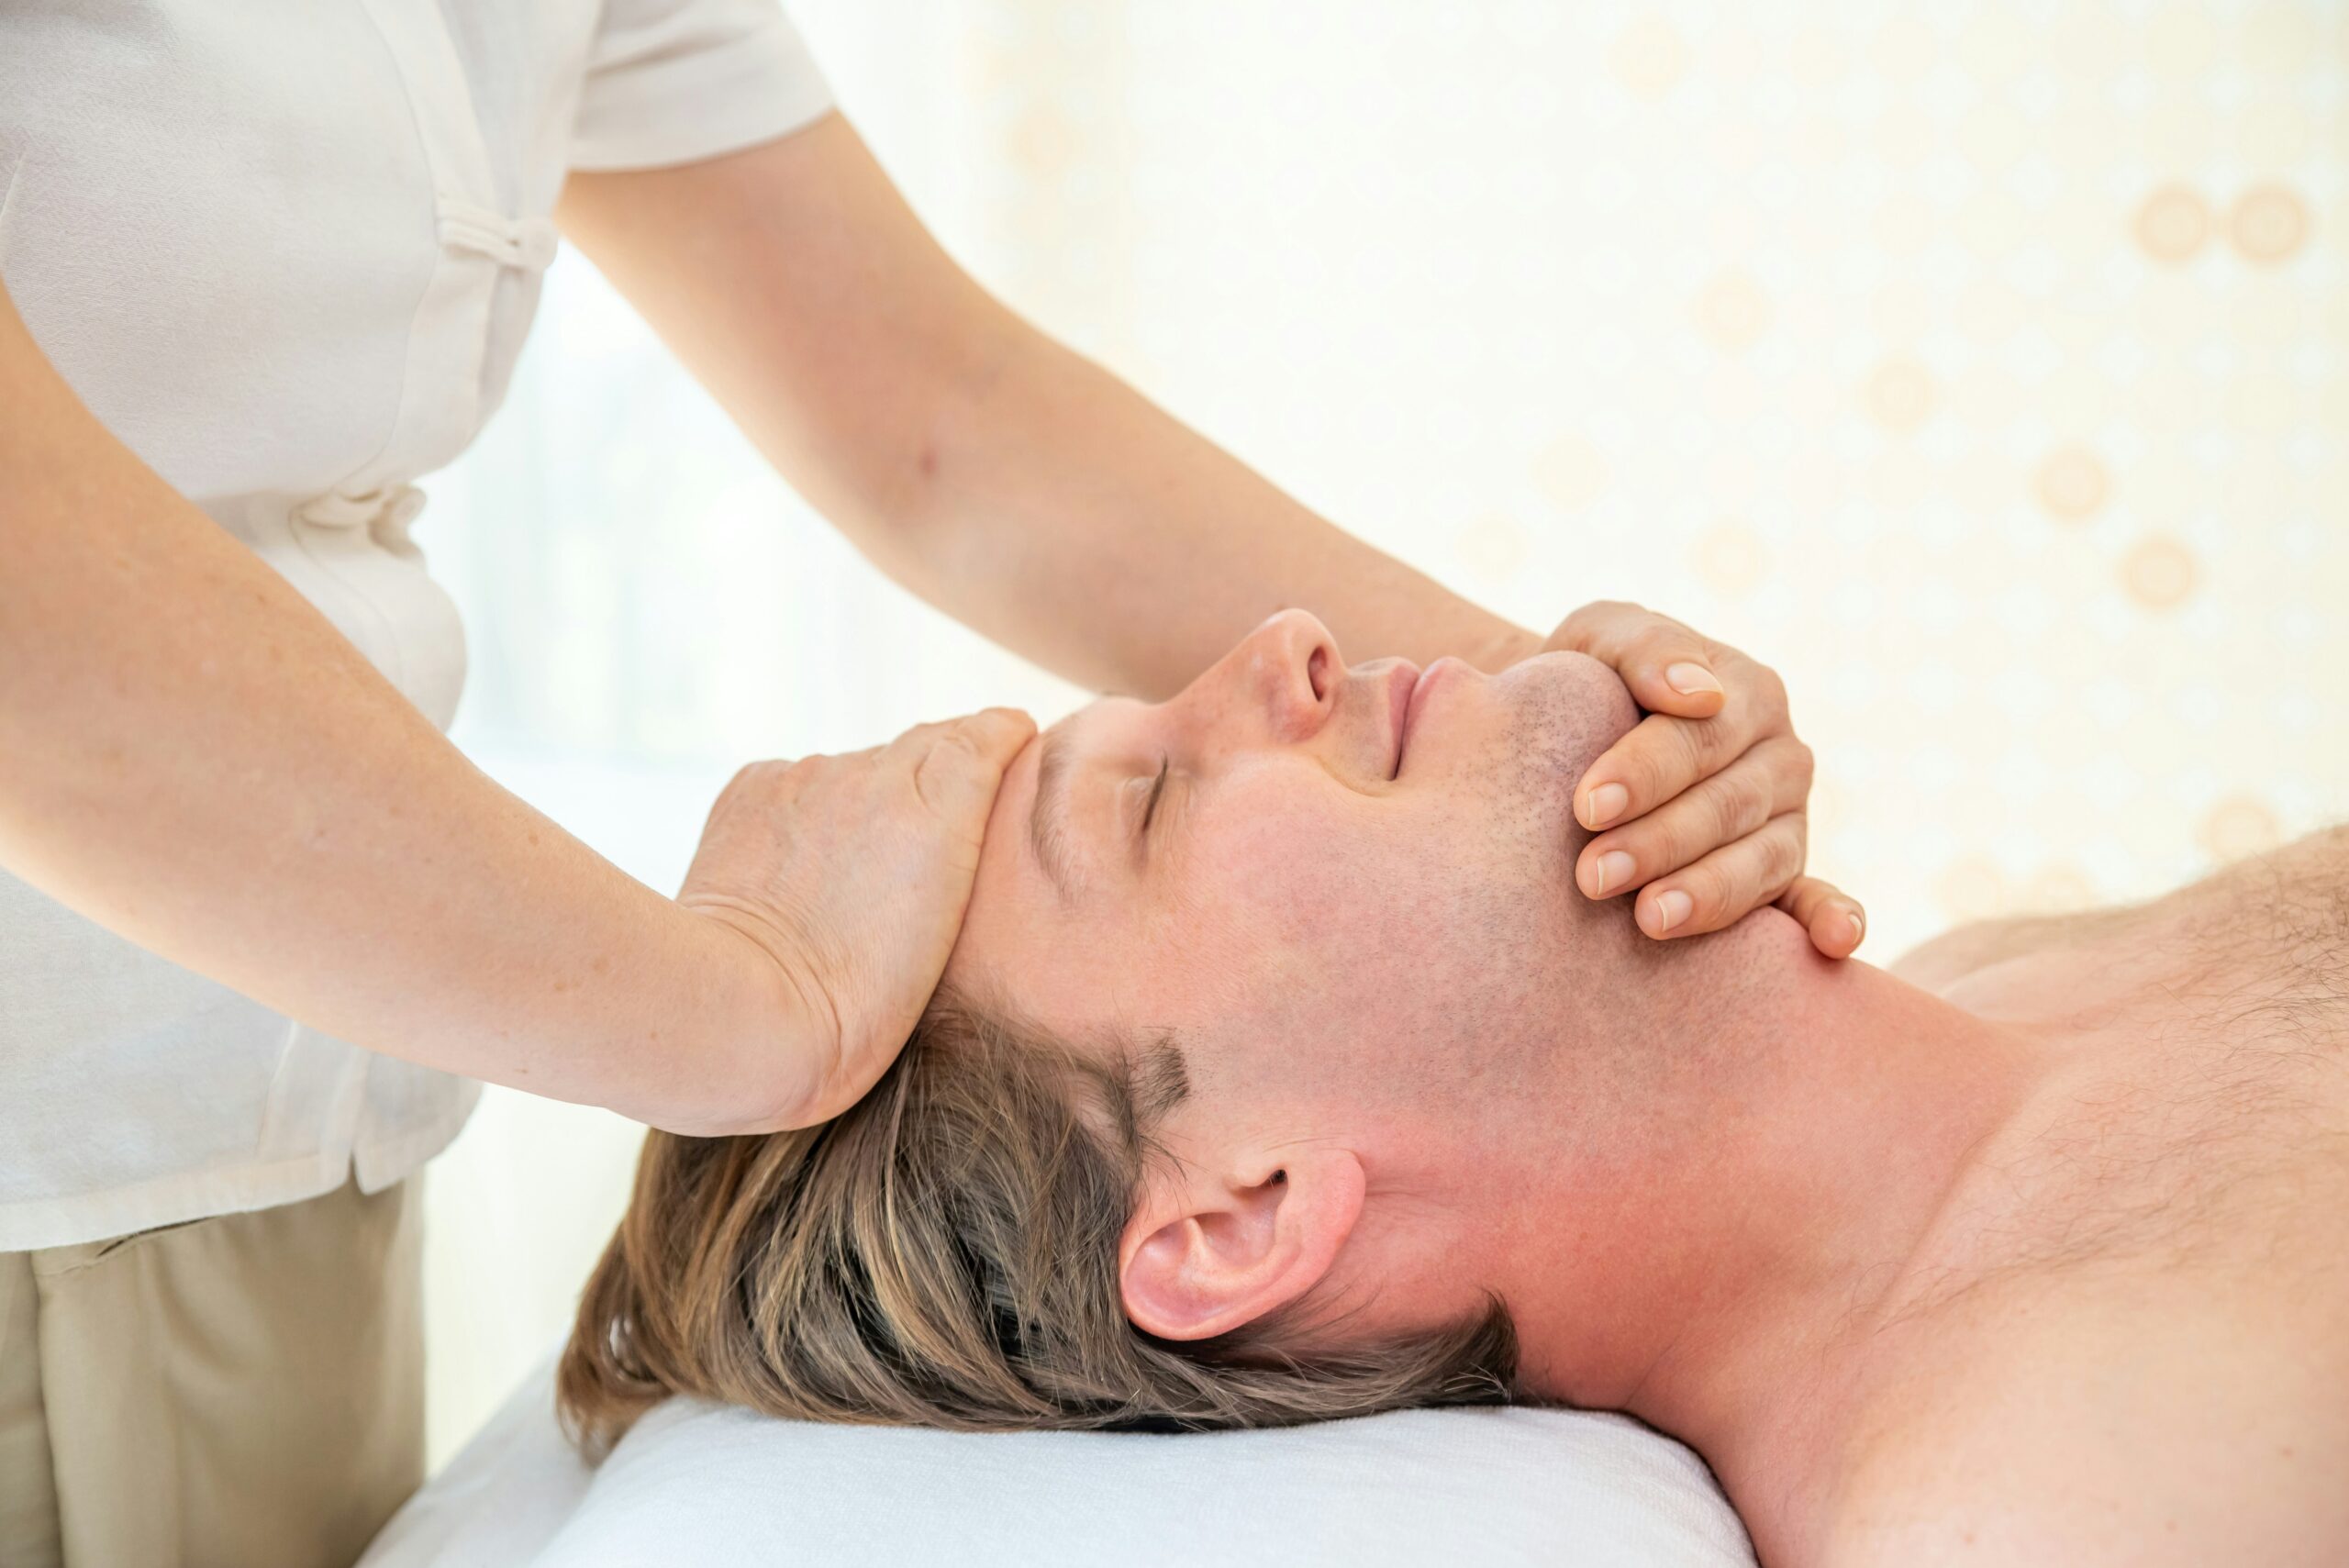 Facial Firming Massage Therapy for Men